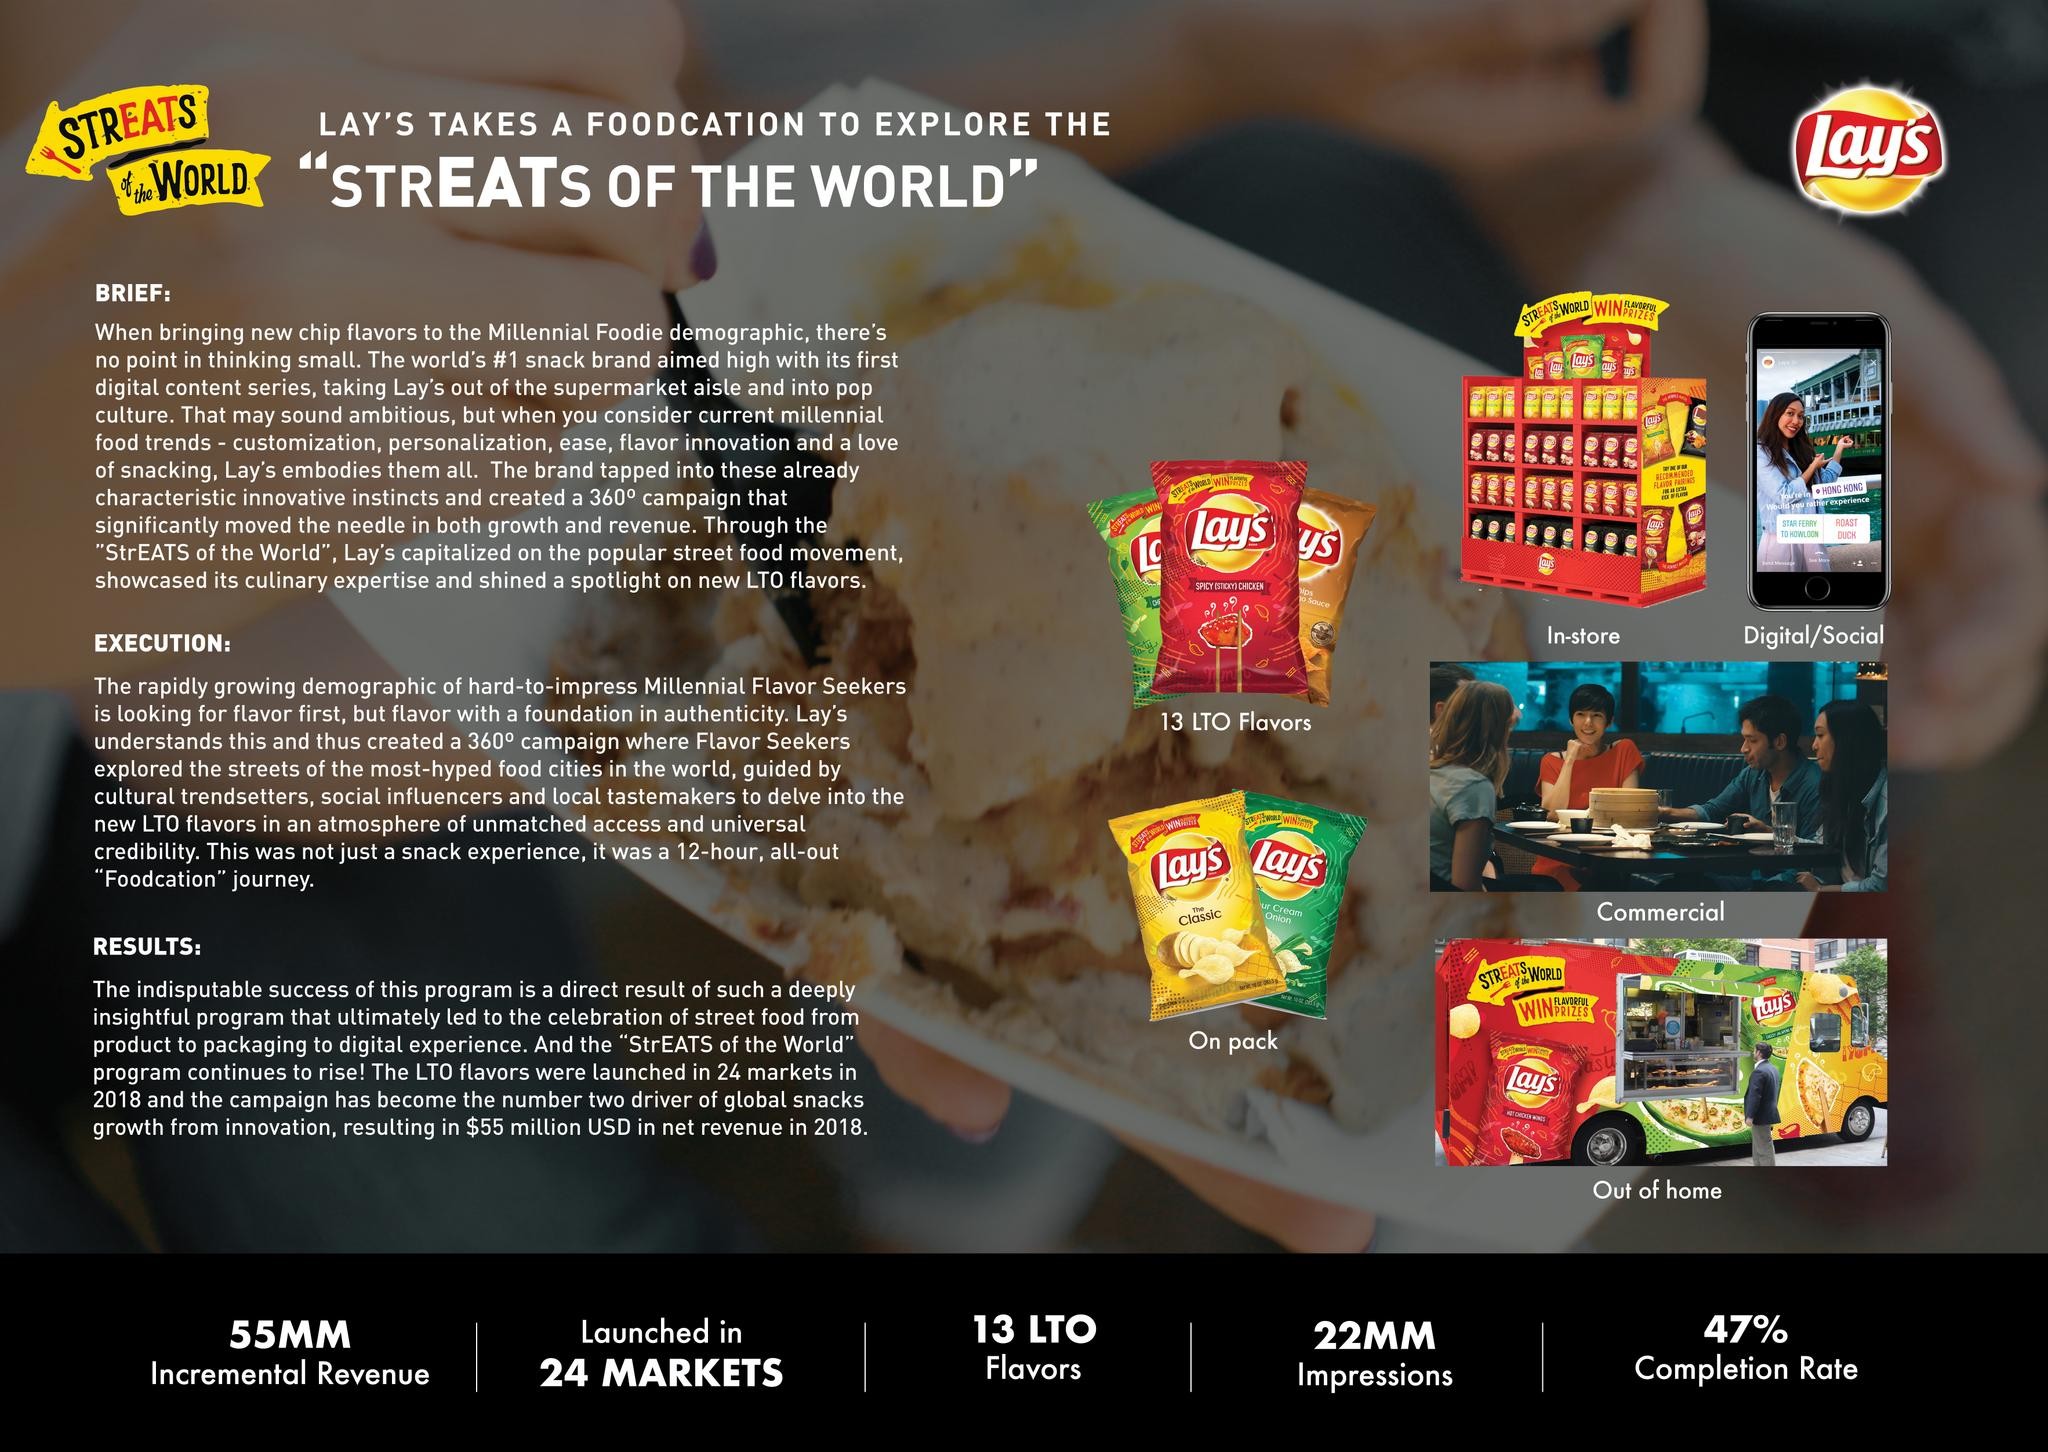 LAY'S STREATS OF THE WORLD ACTIVATION